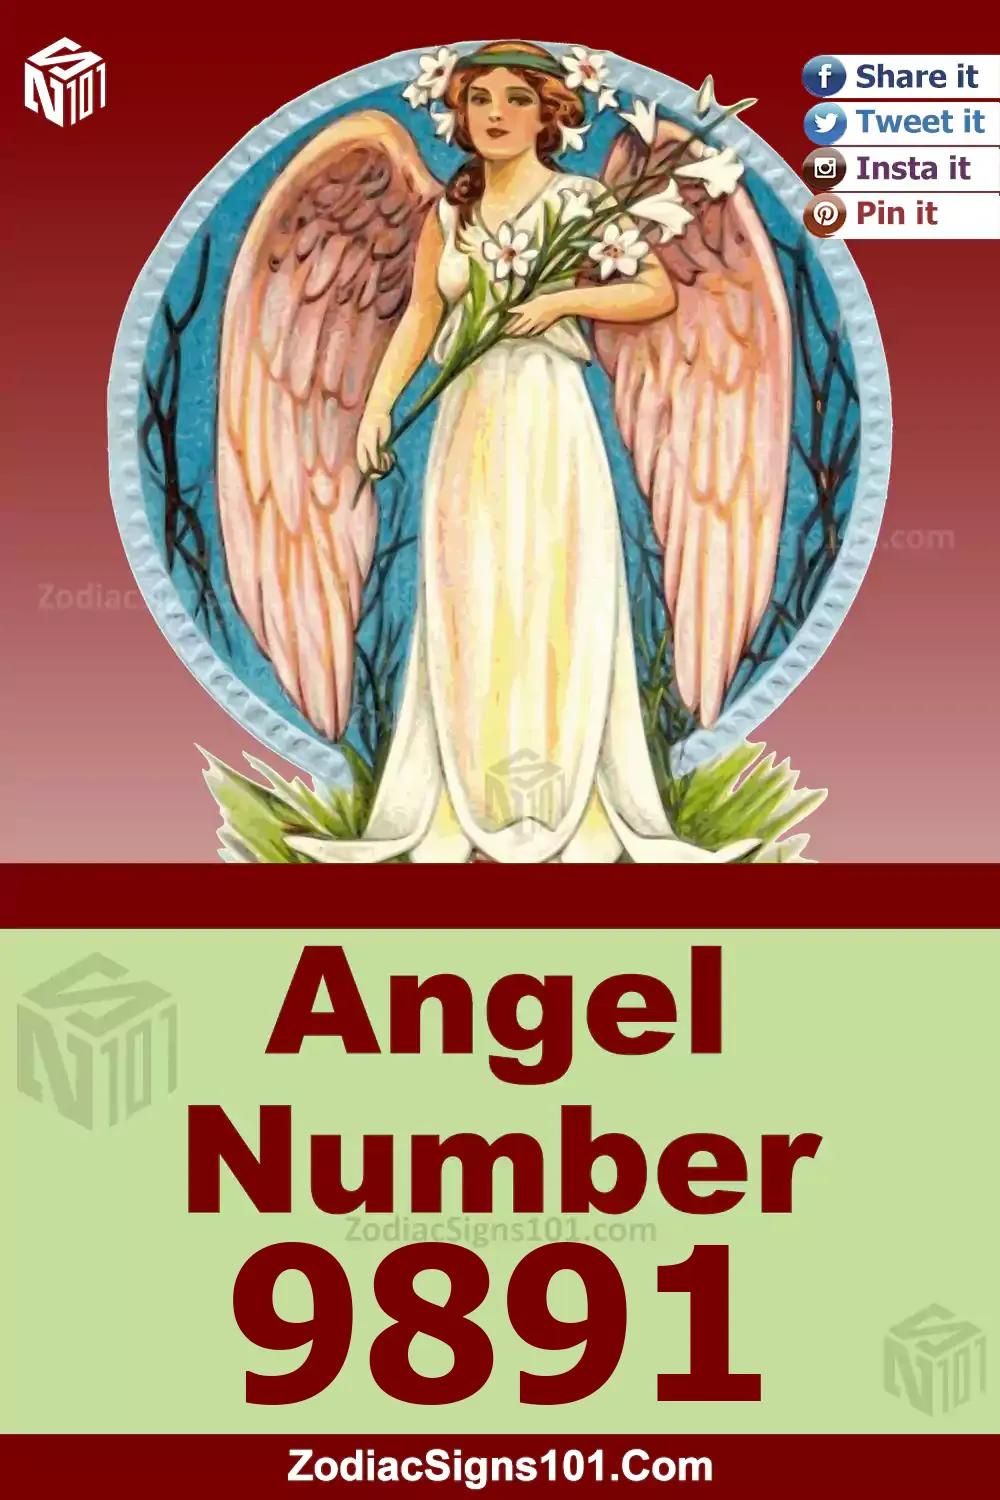 9891 Angel Number Meaning